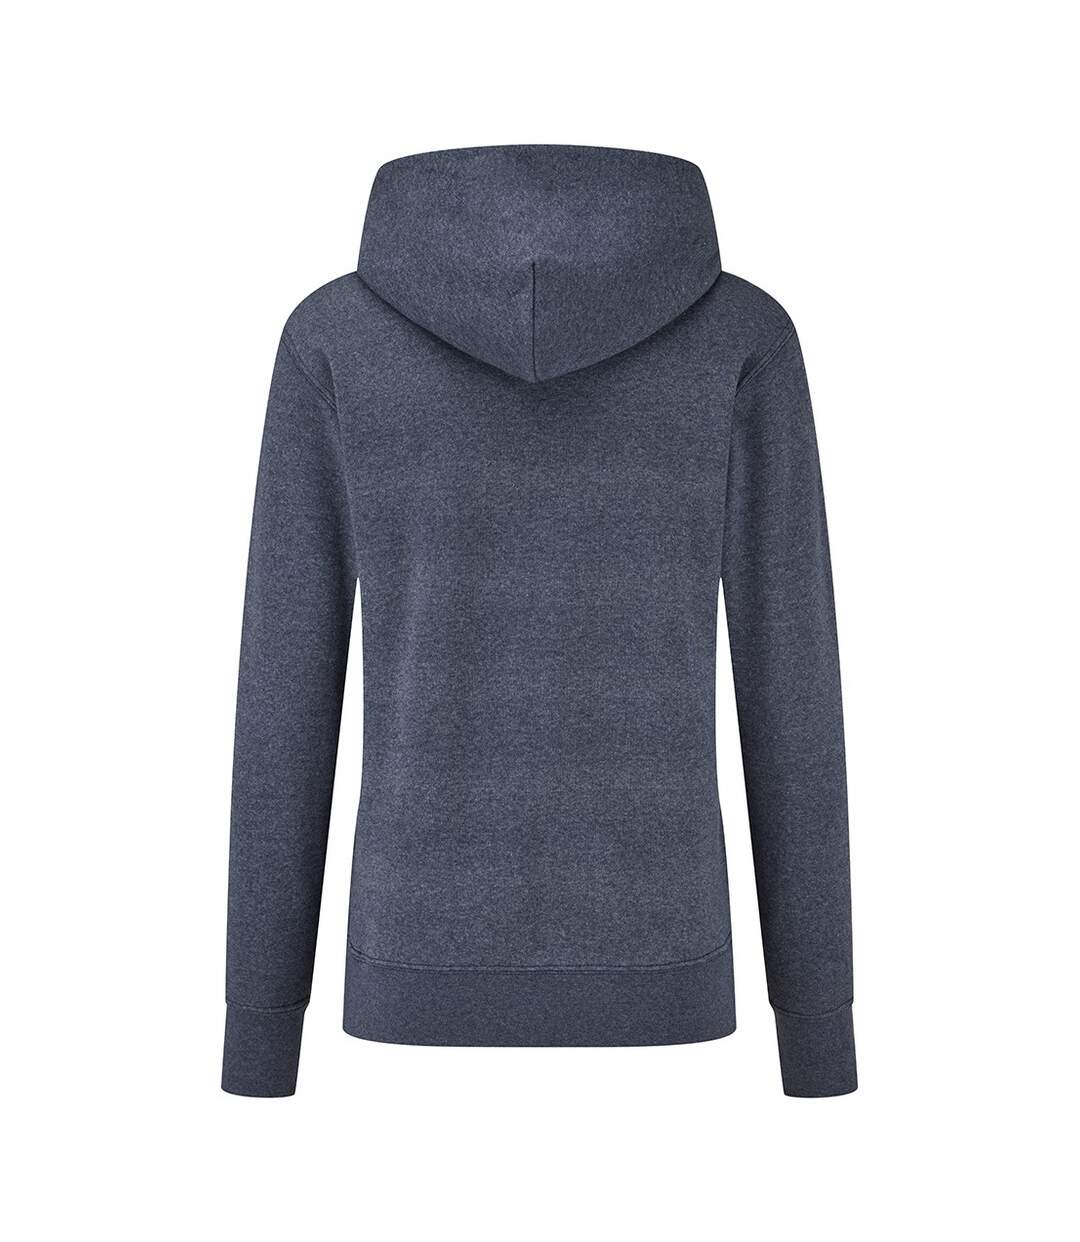 Fruit of the Loom Classic Lady Fit Hooded Sweatshirt (Heather Navy)